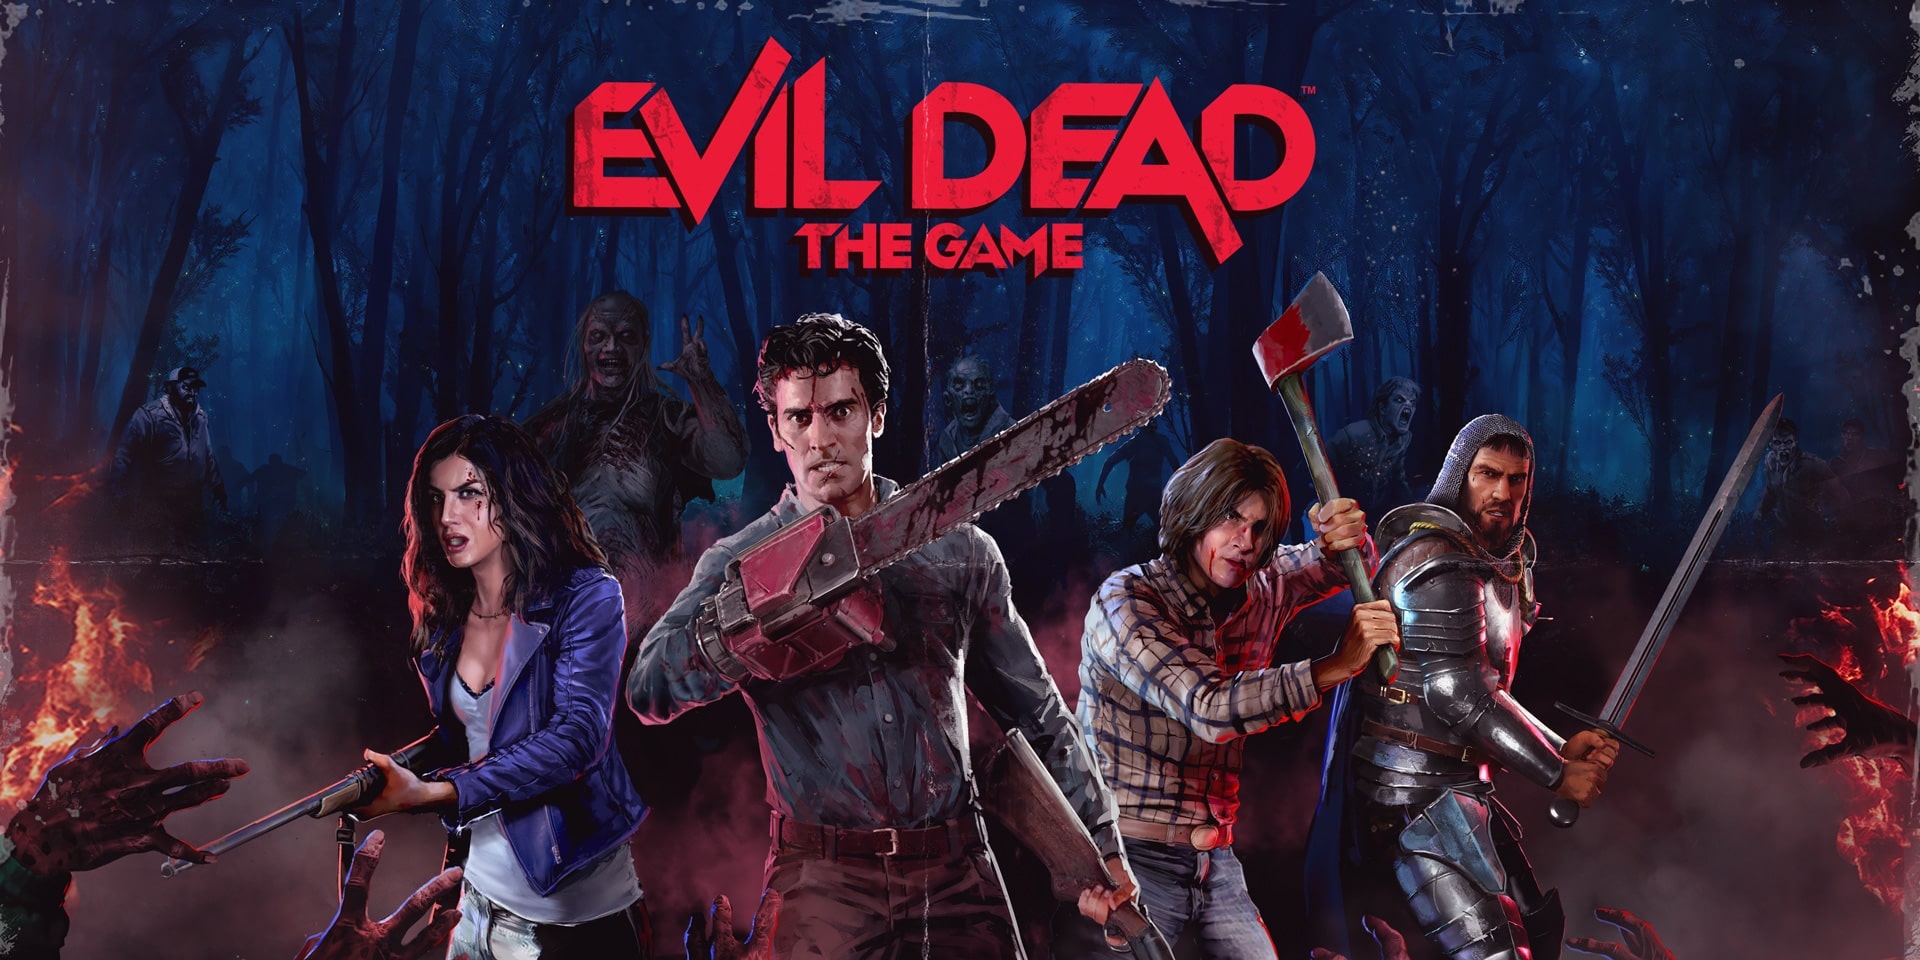 Buy Evil Dead The Game Season Pass 1 CD Key Compare Prices